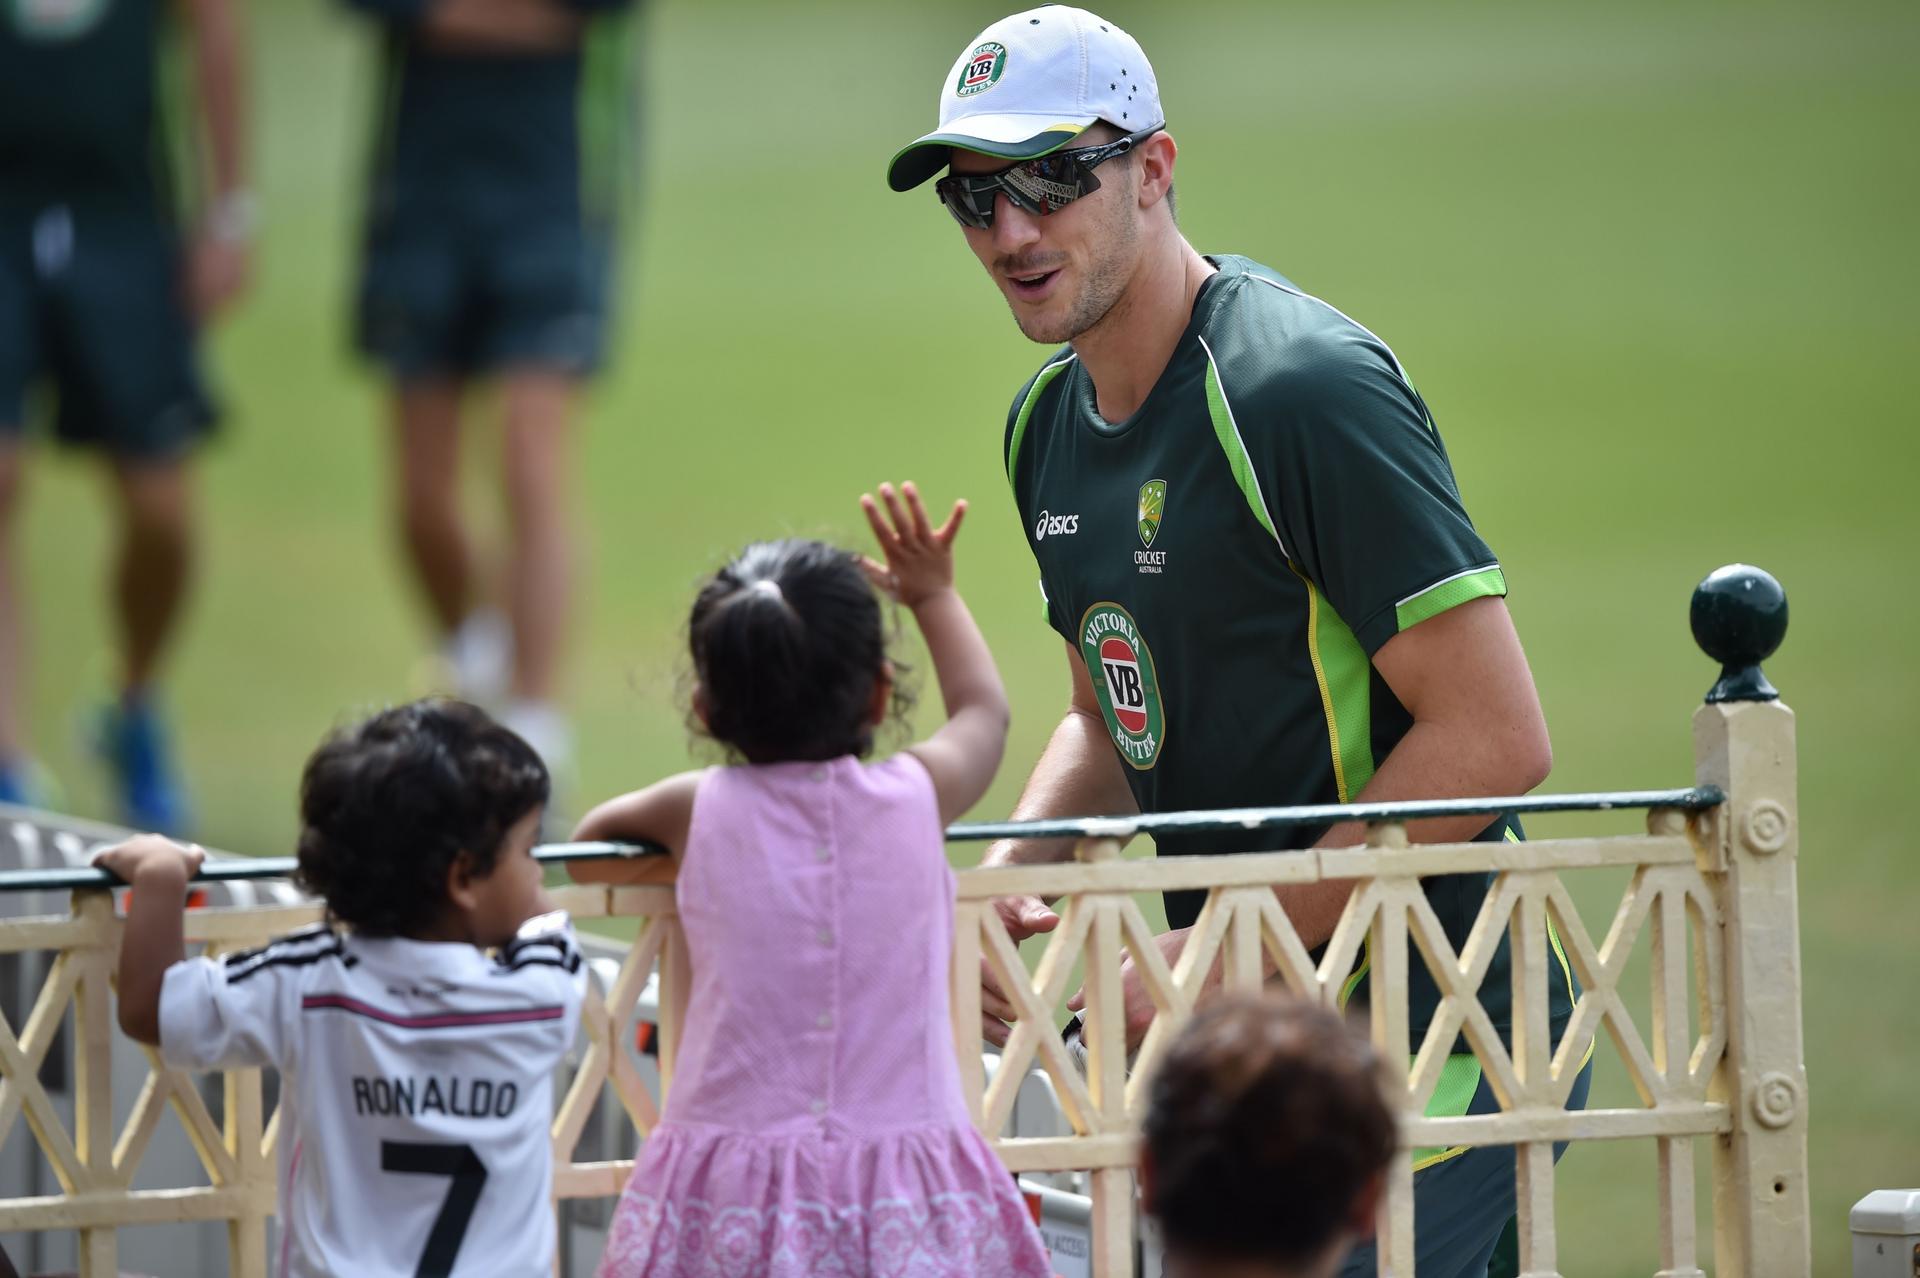 Australia bowler Pat Cummins interacts with a young fan during a training session. Photo: AFP